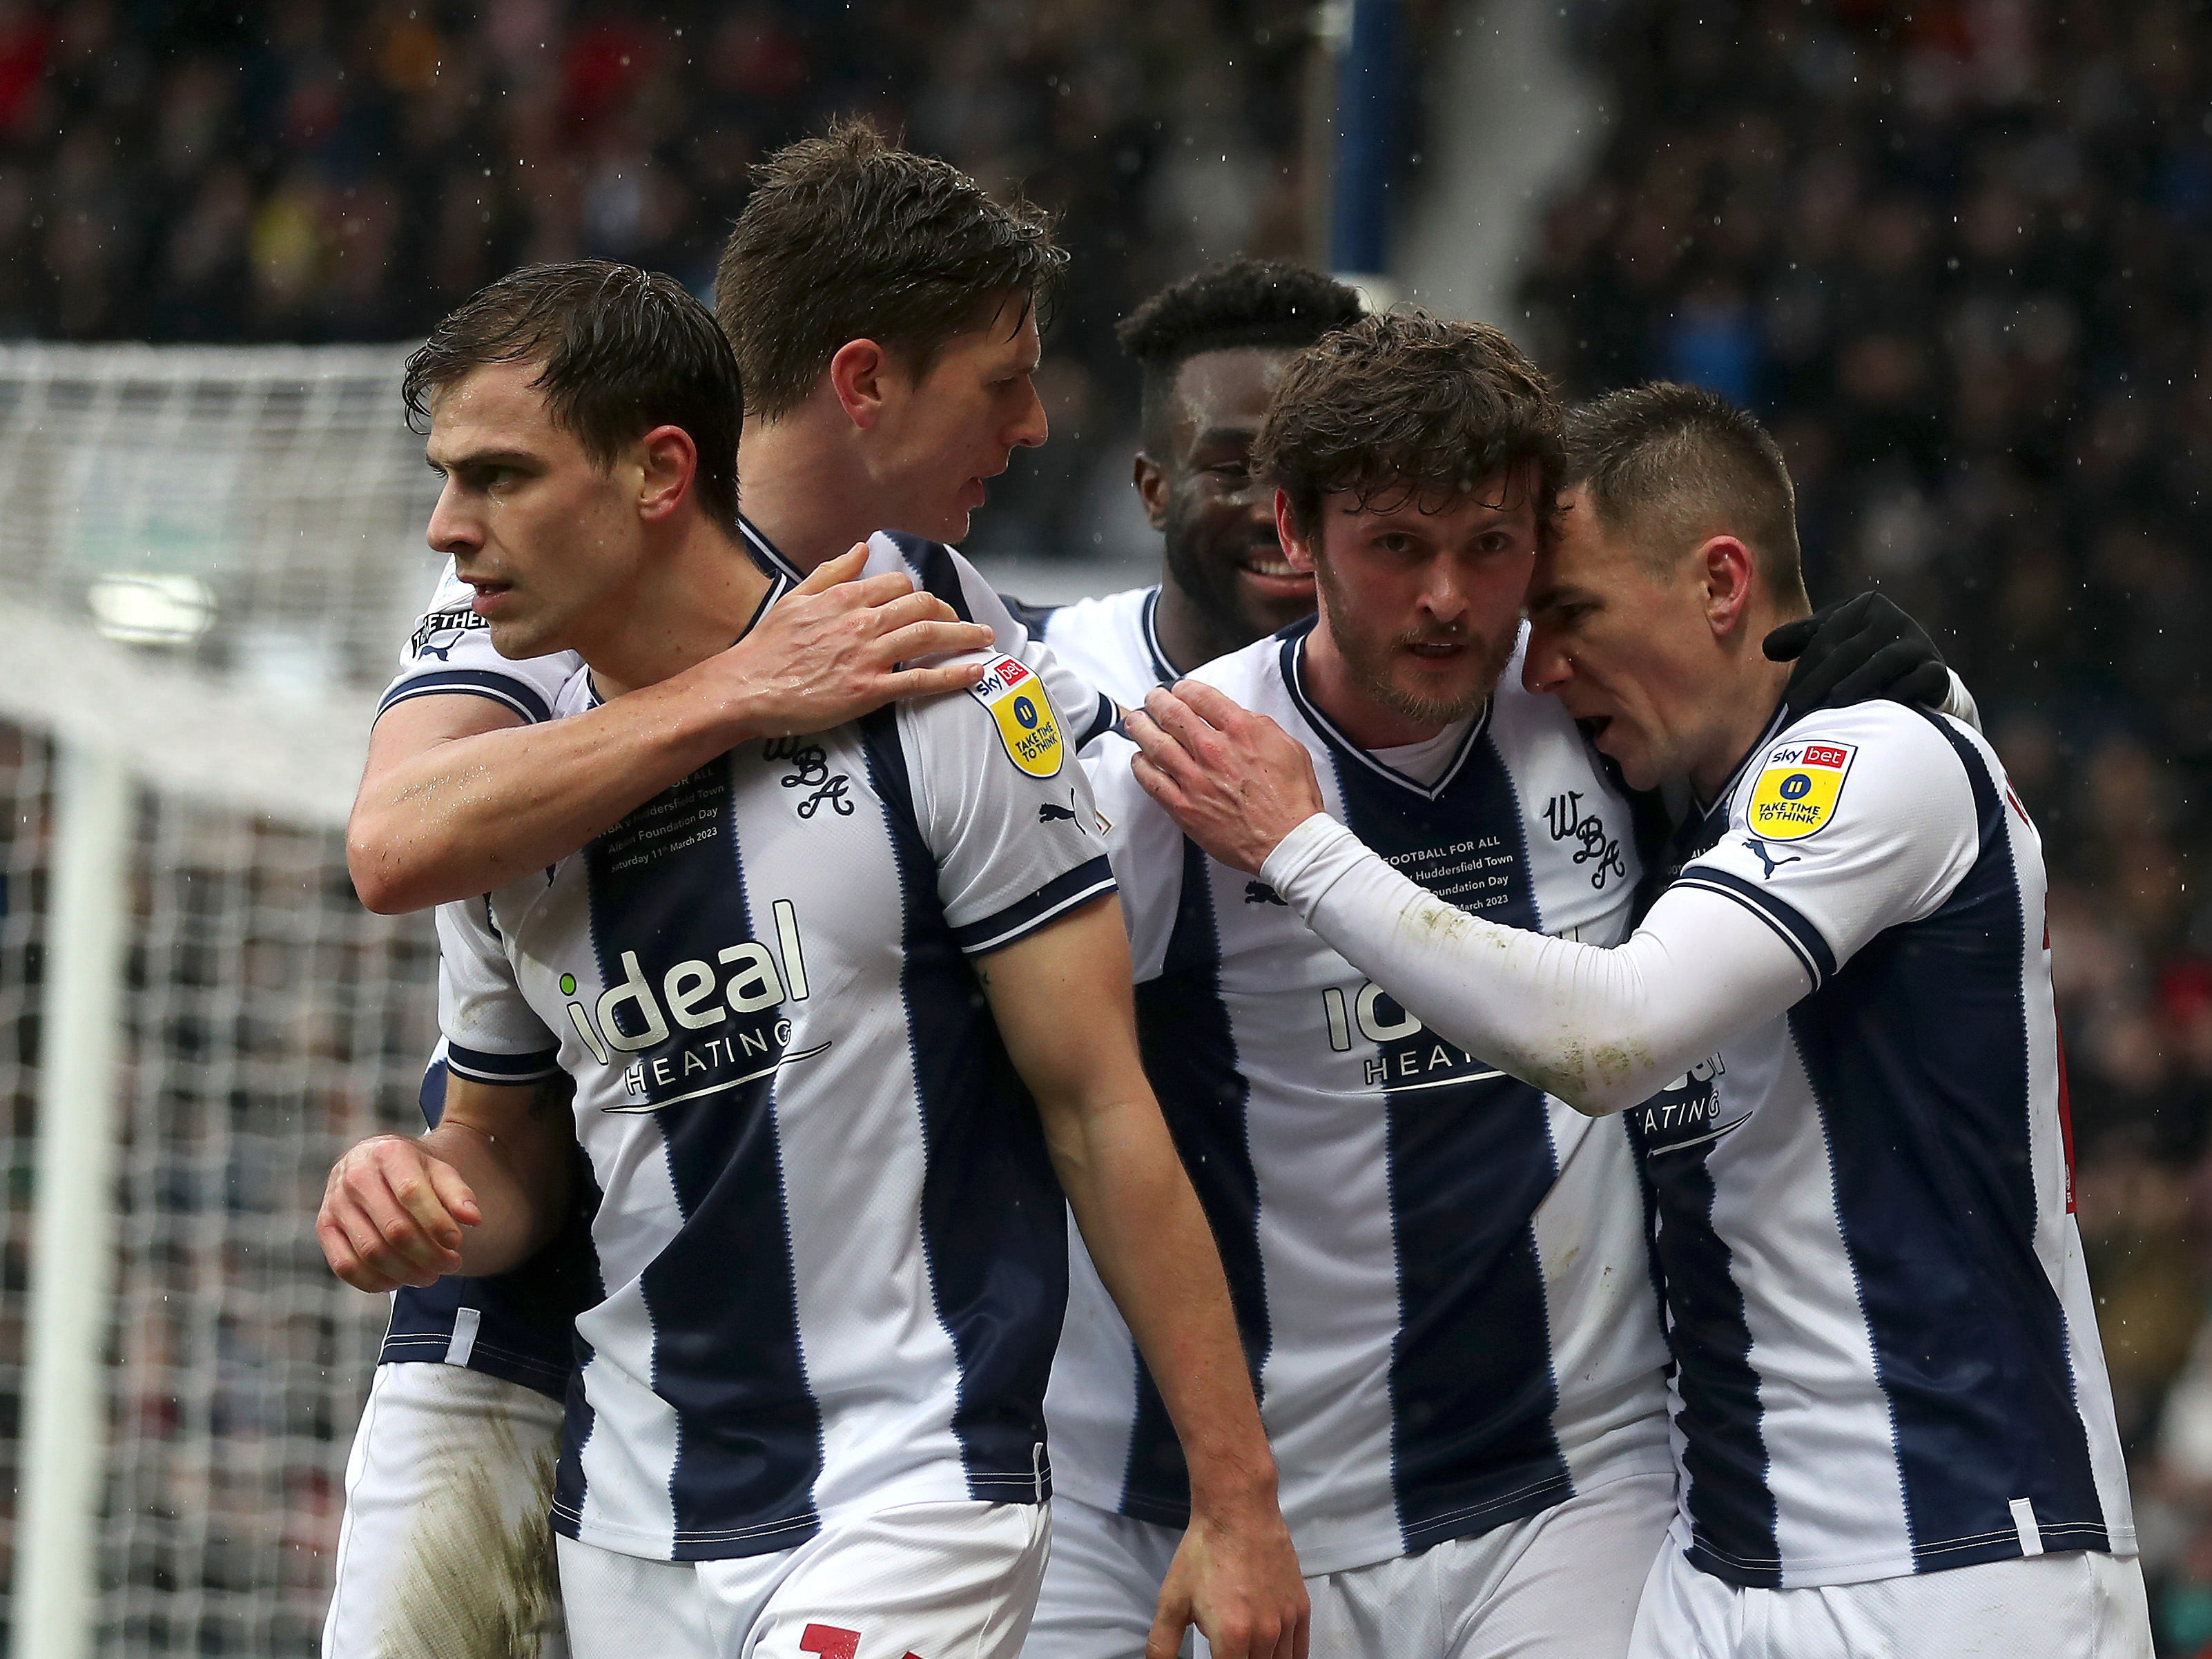 Albion players celebrate after scoring against Huddersfield 